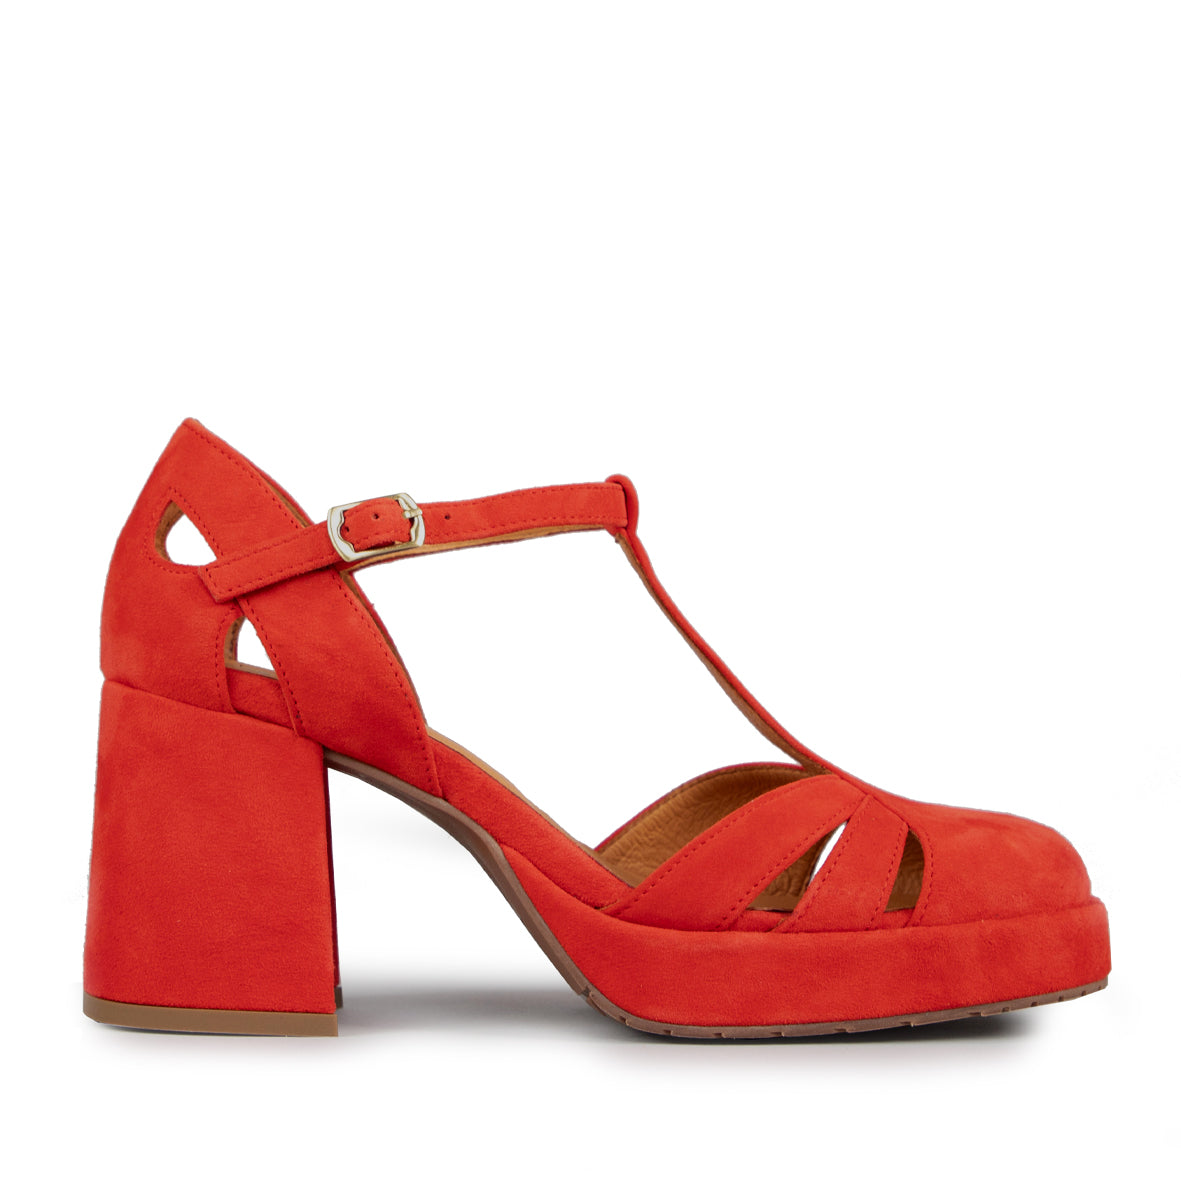 Chaza WIDE Red Suede